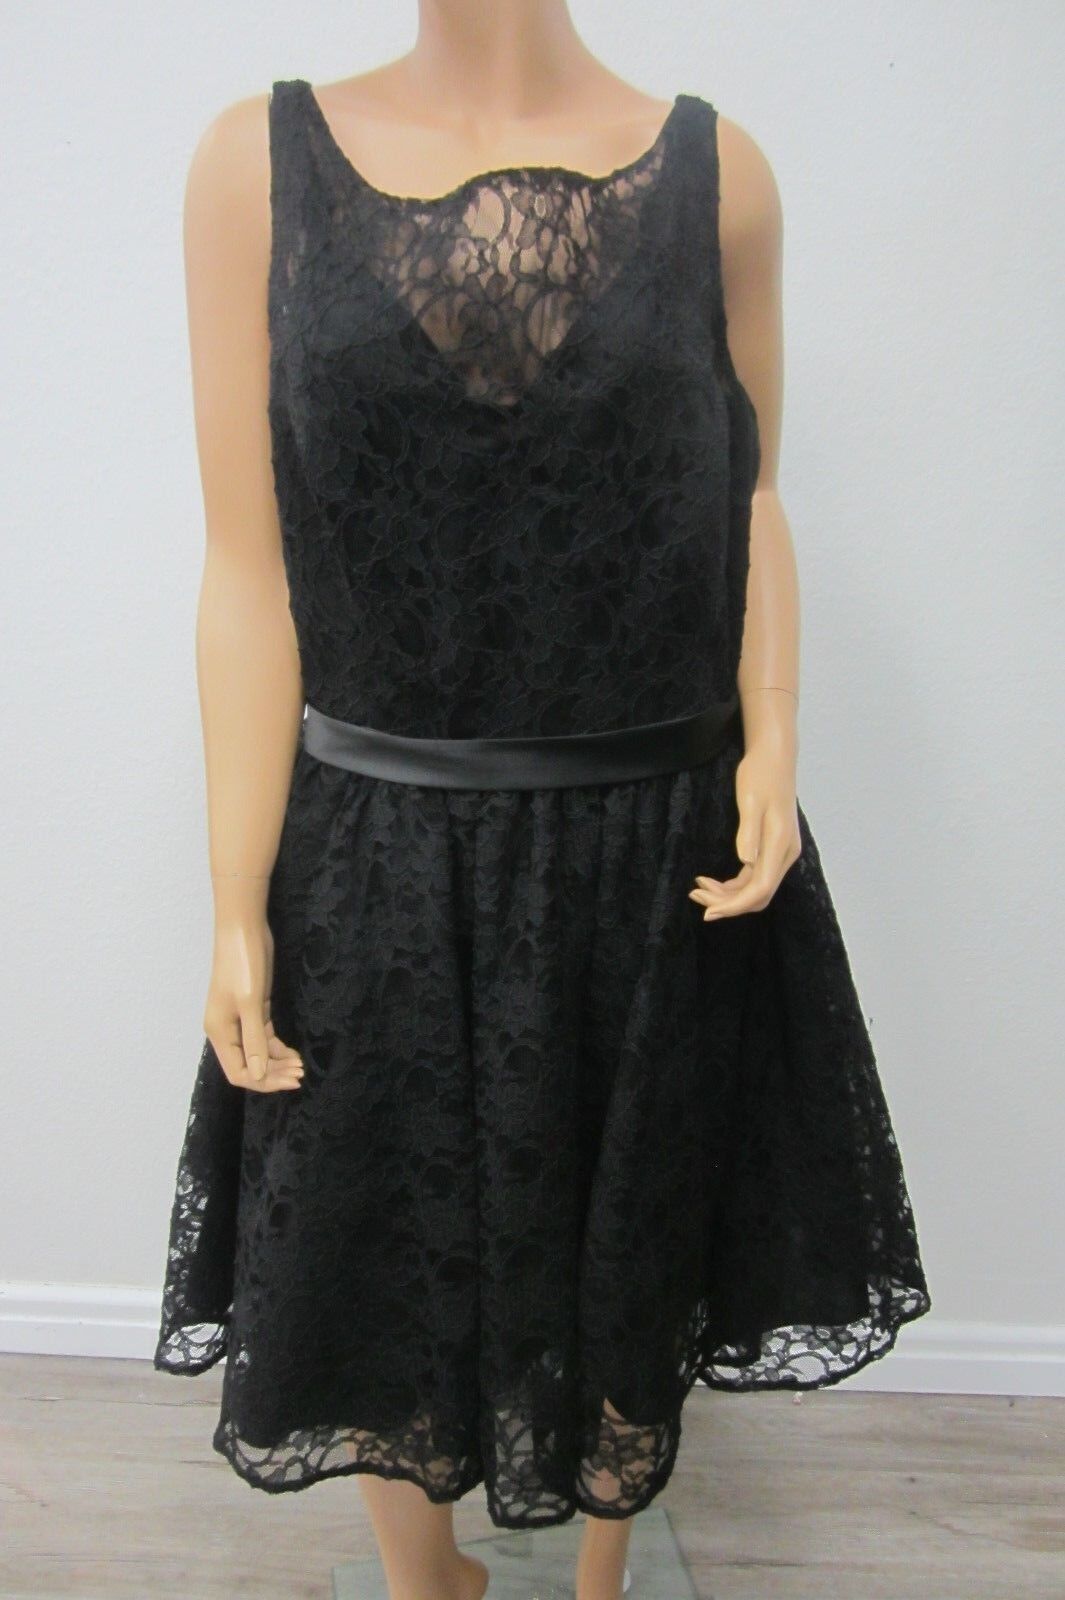 *STUNNING*  NWT Mori Lee Mid Calf Black Lace Dress by Affairs Size 28